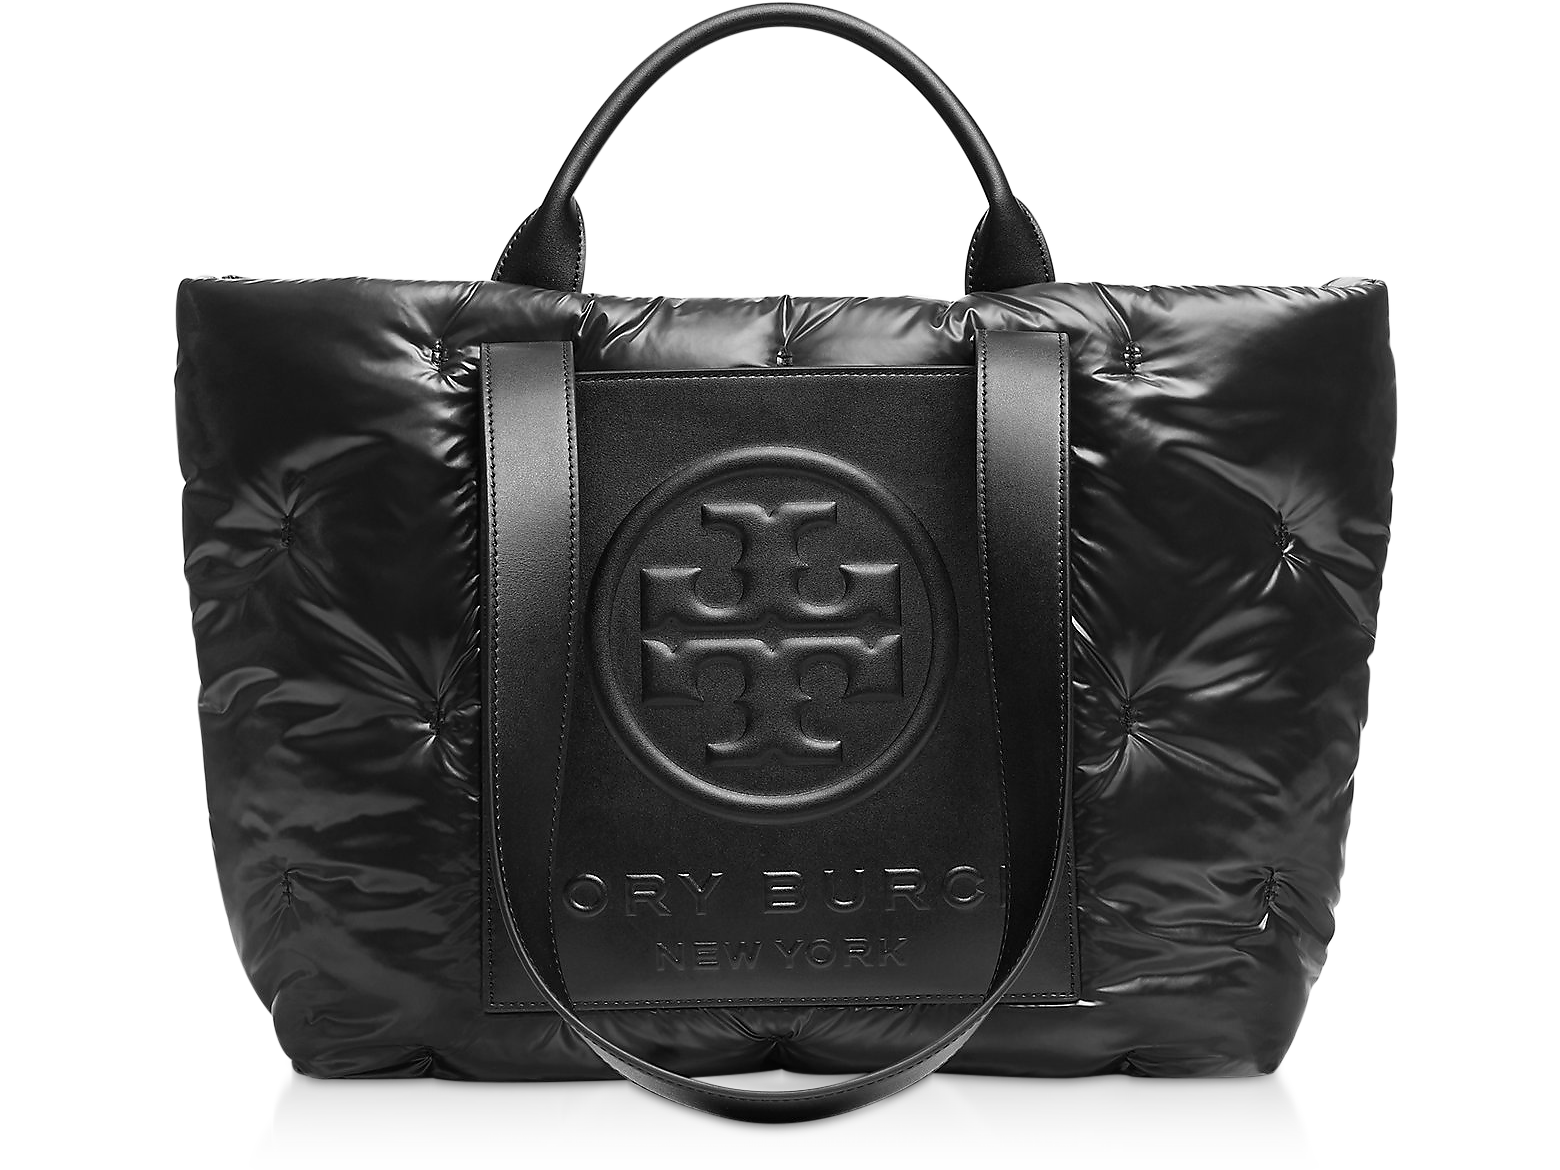 Totes bags Tory Burch - Perry Bombe black quilted nylon tote bag - 56255001